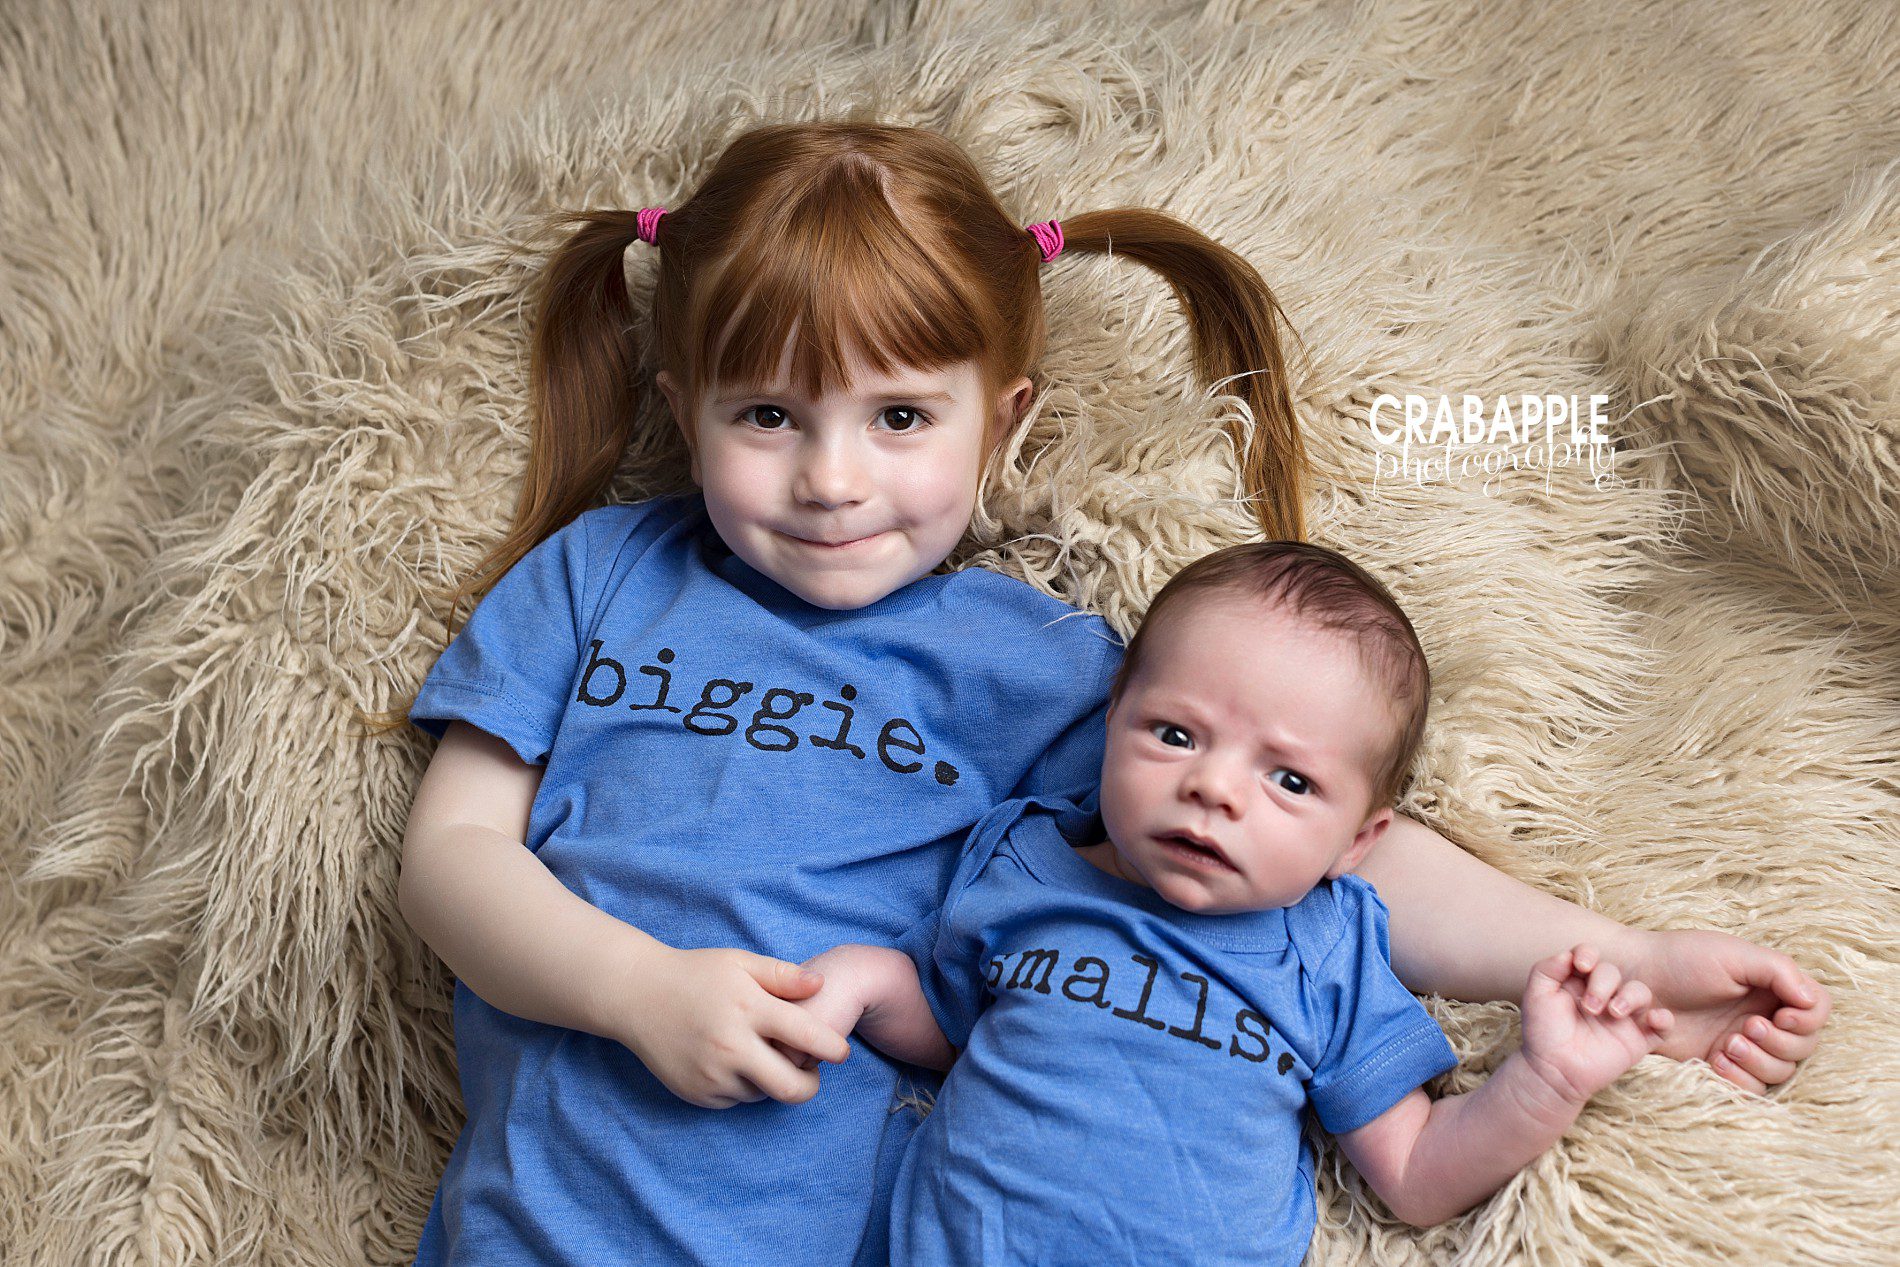 biggie and smalls shirts for newborn photos and sibling